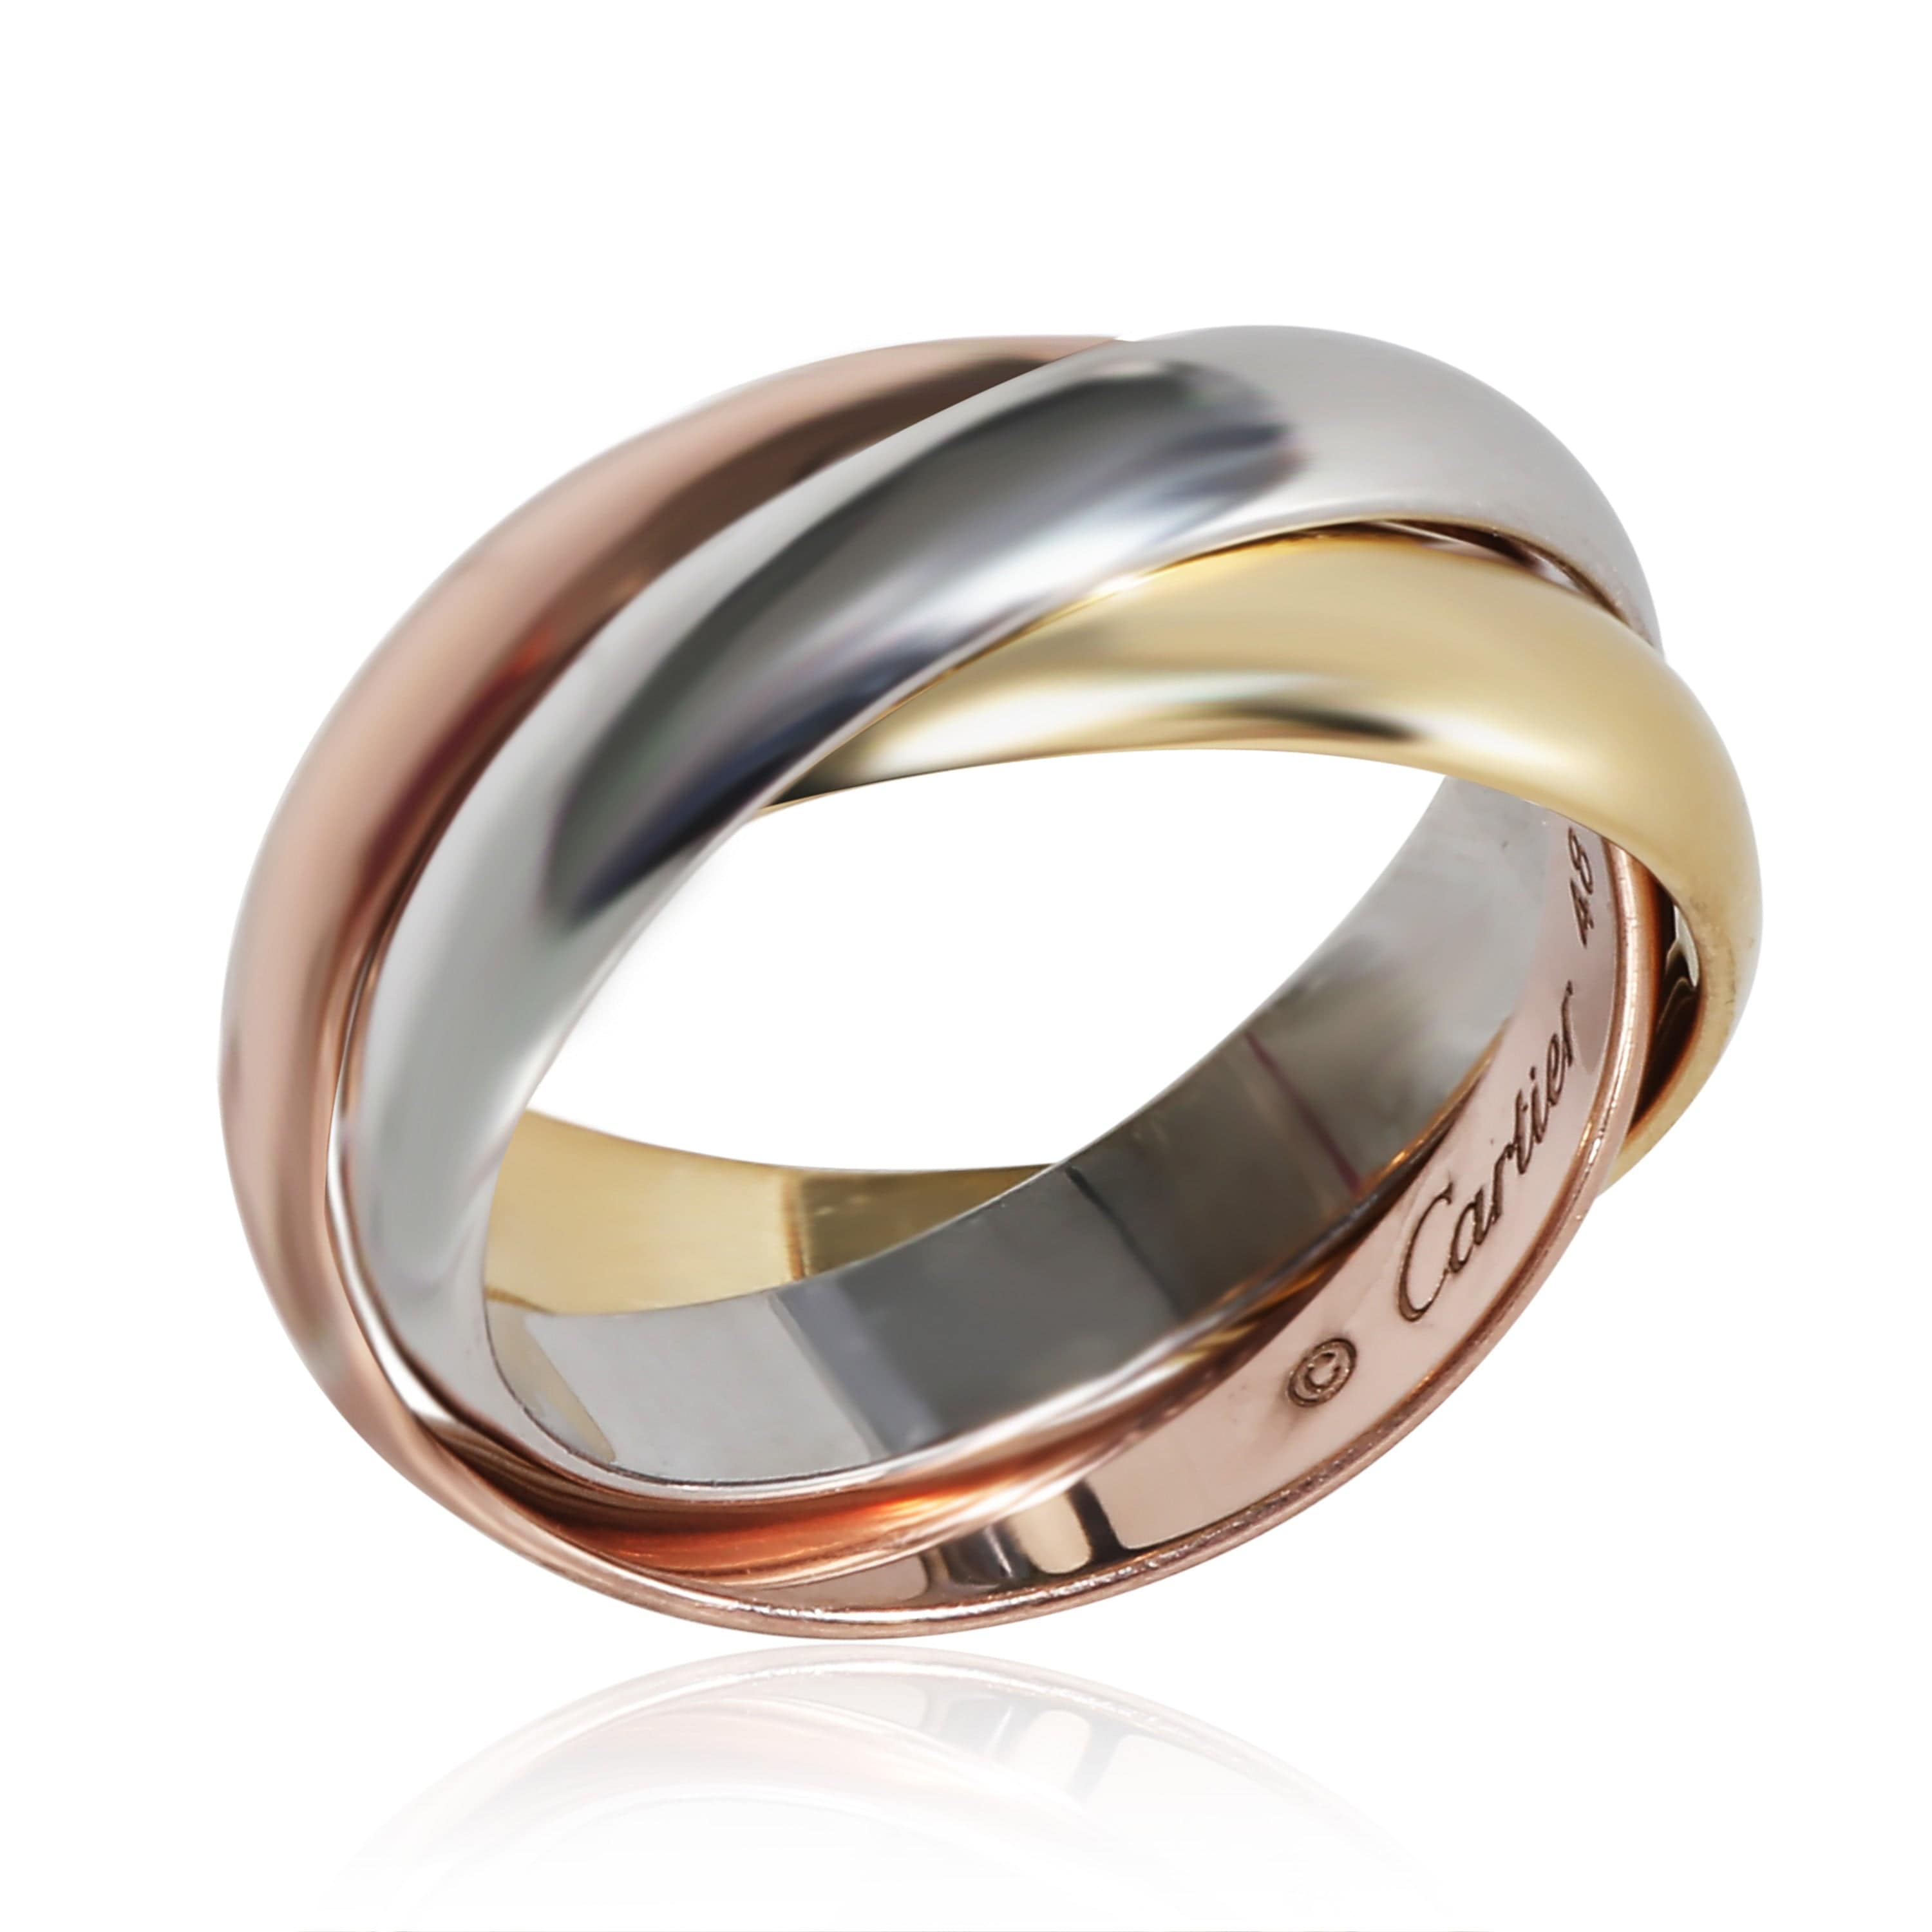 Cartier Cartier Classic Trinity Ring in 18k 3 Tone Gold